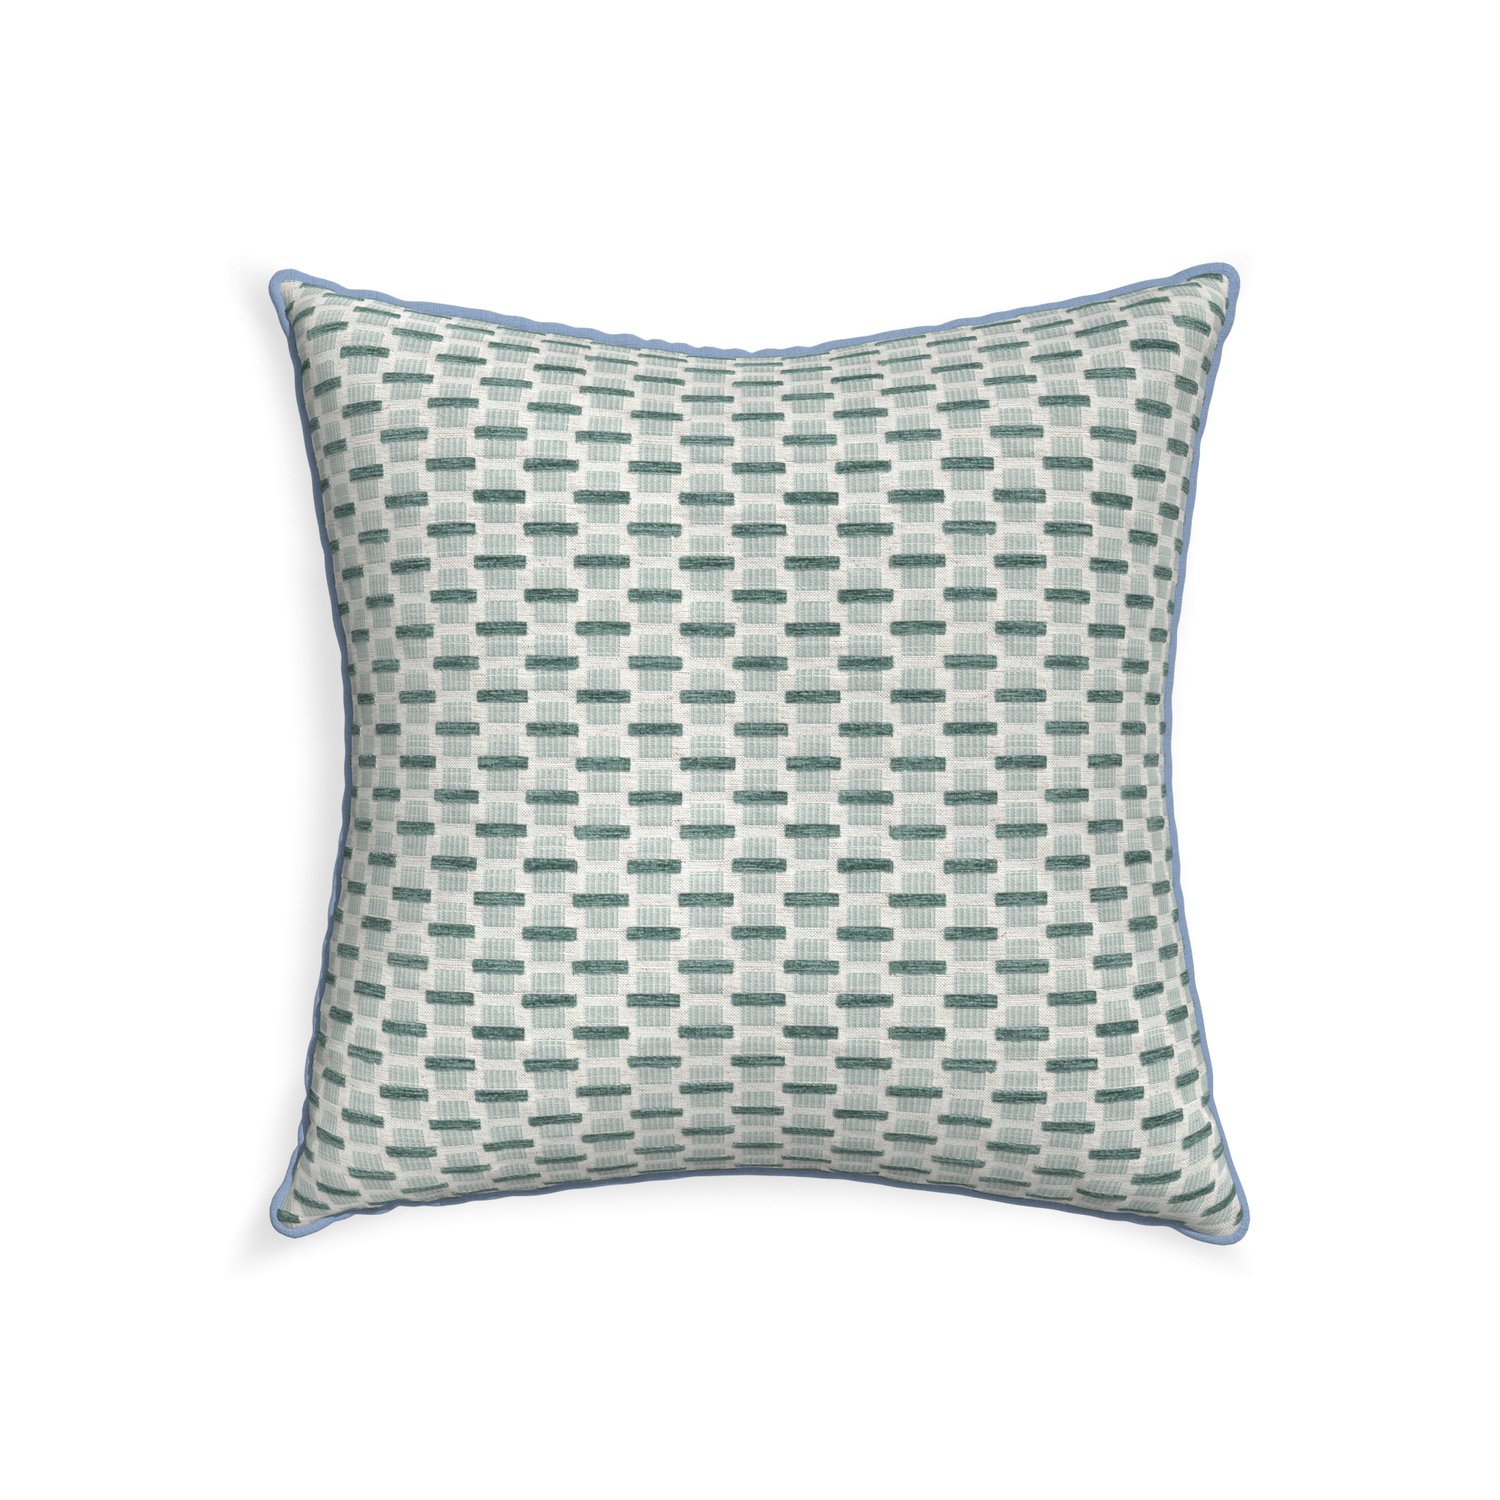 22-square willow mint custom green geometric chenillepillow with sky piping on white background